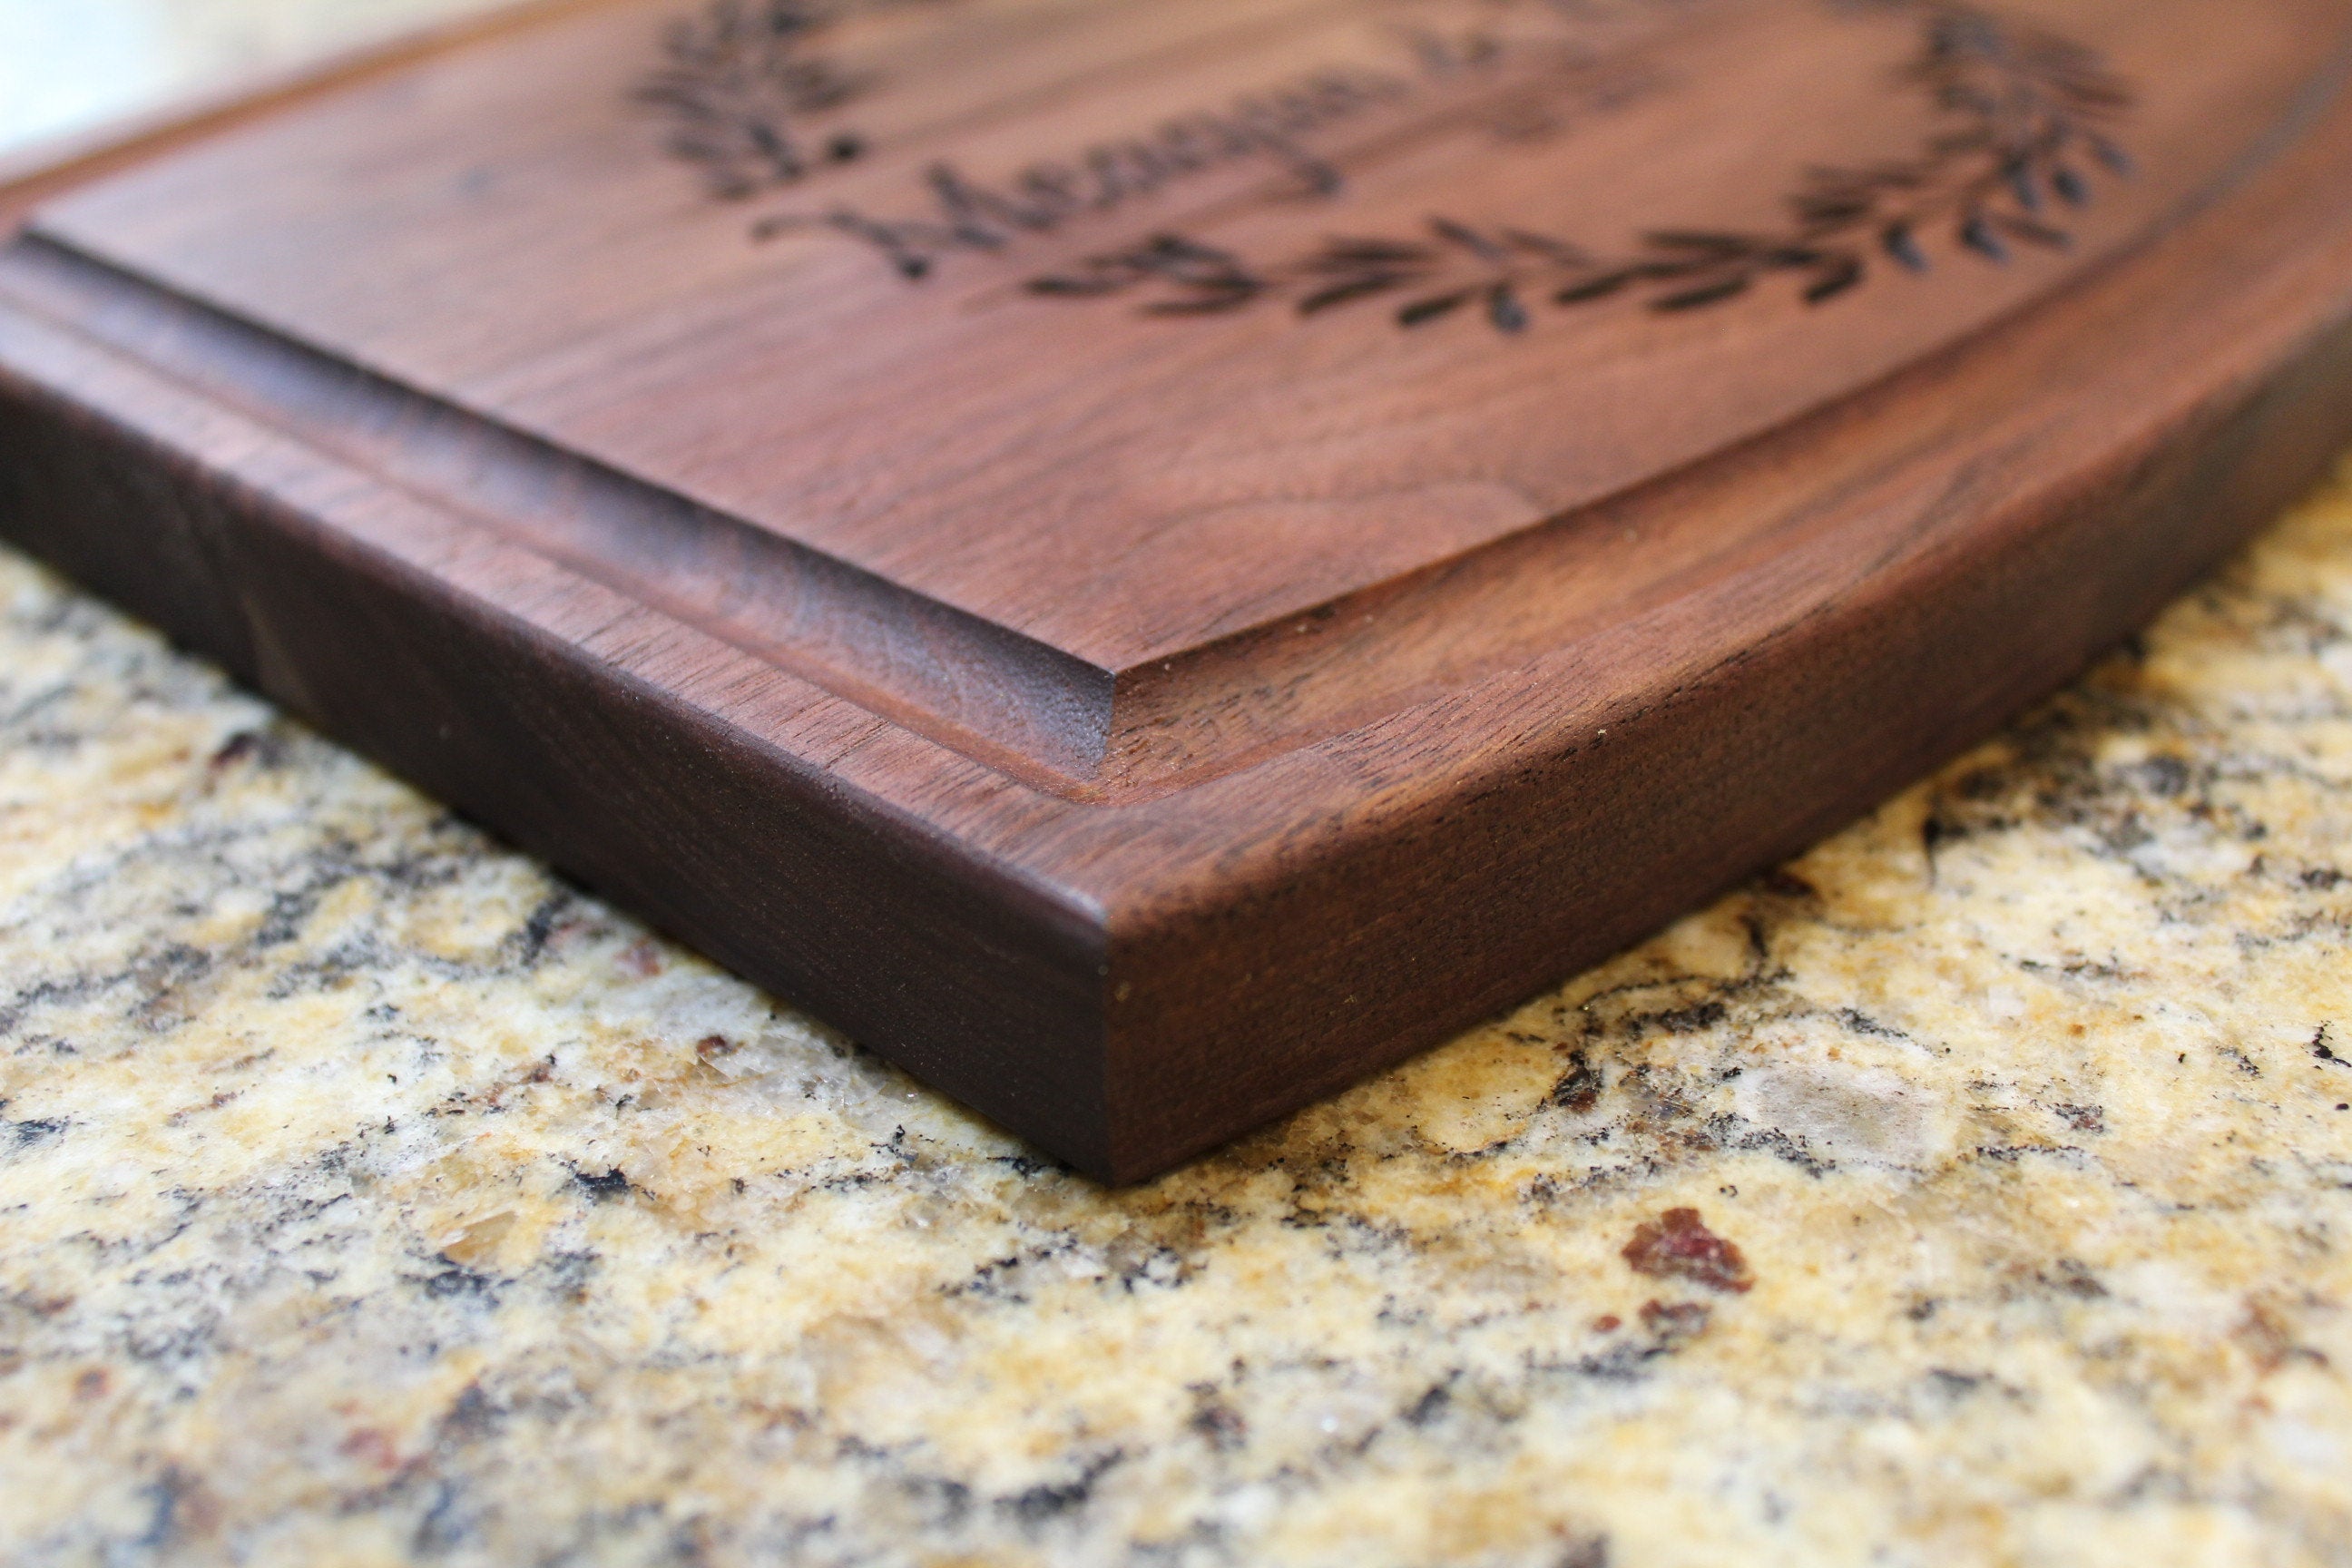 Cutting Boards Personalized - 40th Anniversary gift